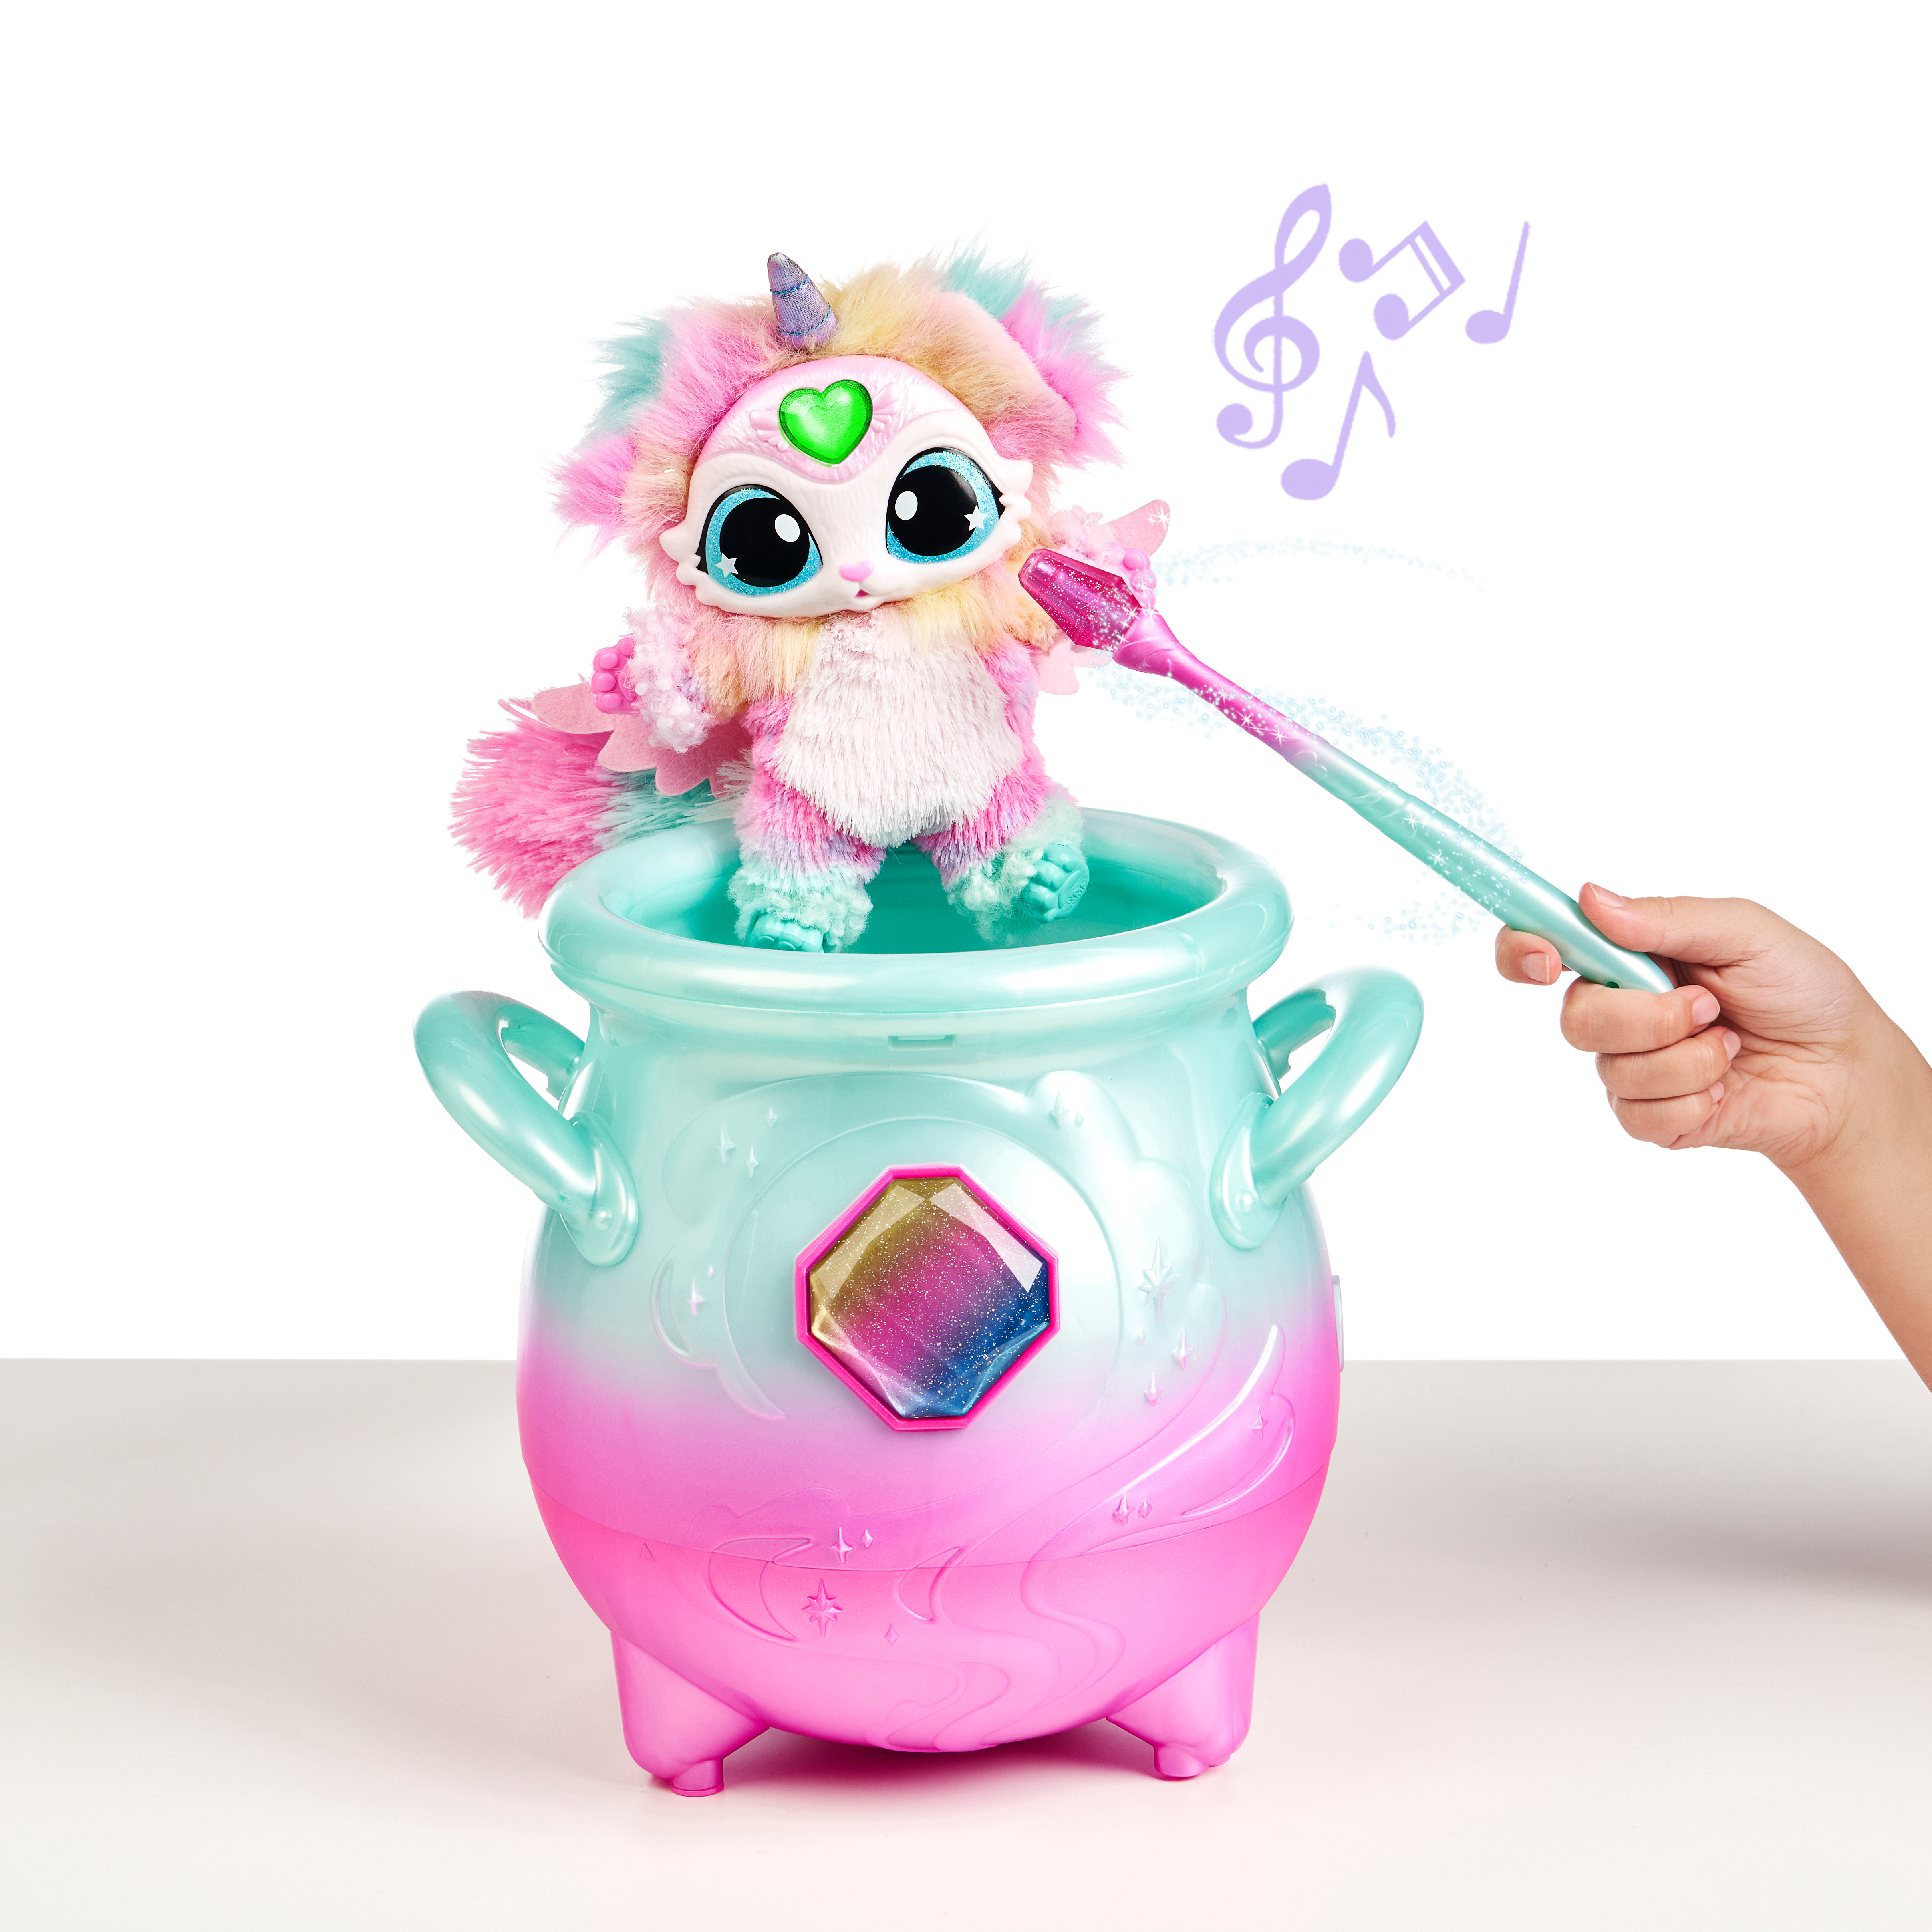 Magic Mixies Magical Misting Cauldron with Exclusive Interactive 8 inch Rainbow Plush Toy and 50+ Sounds and Reactions, Toys for Kids, Ages 5+ - image 4 of 14